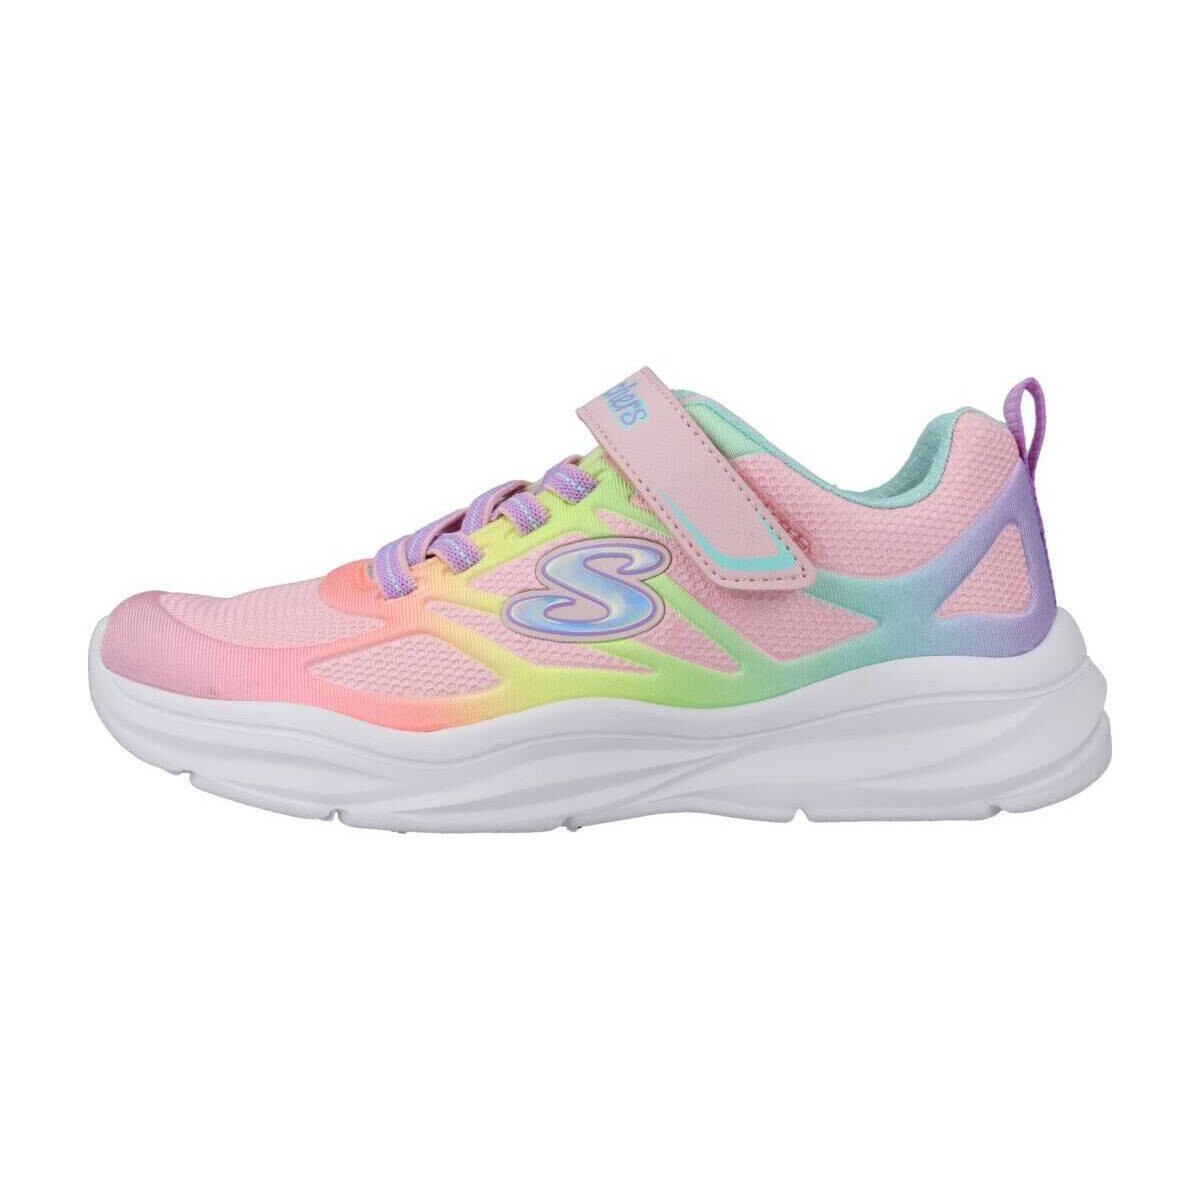 Chaussures Fille Baskets basses Skechers POWER JAMS Rose